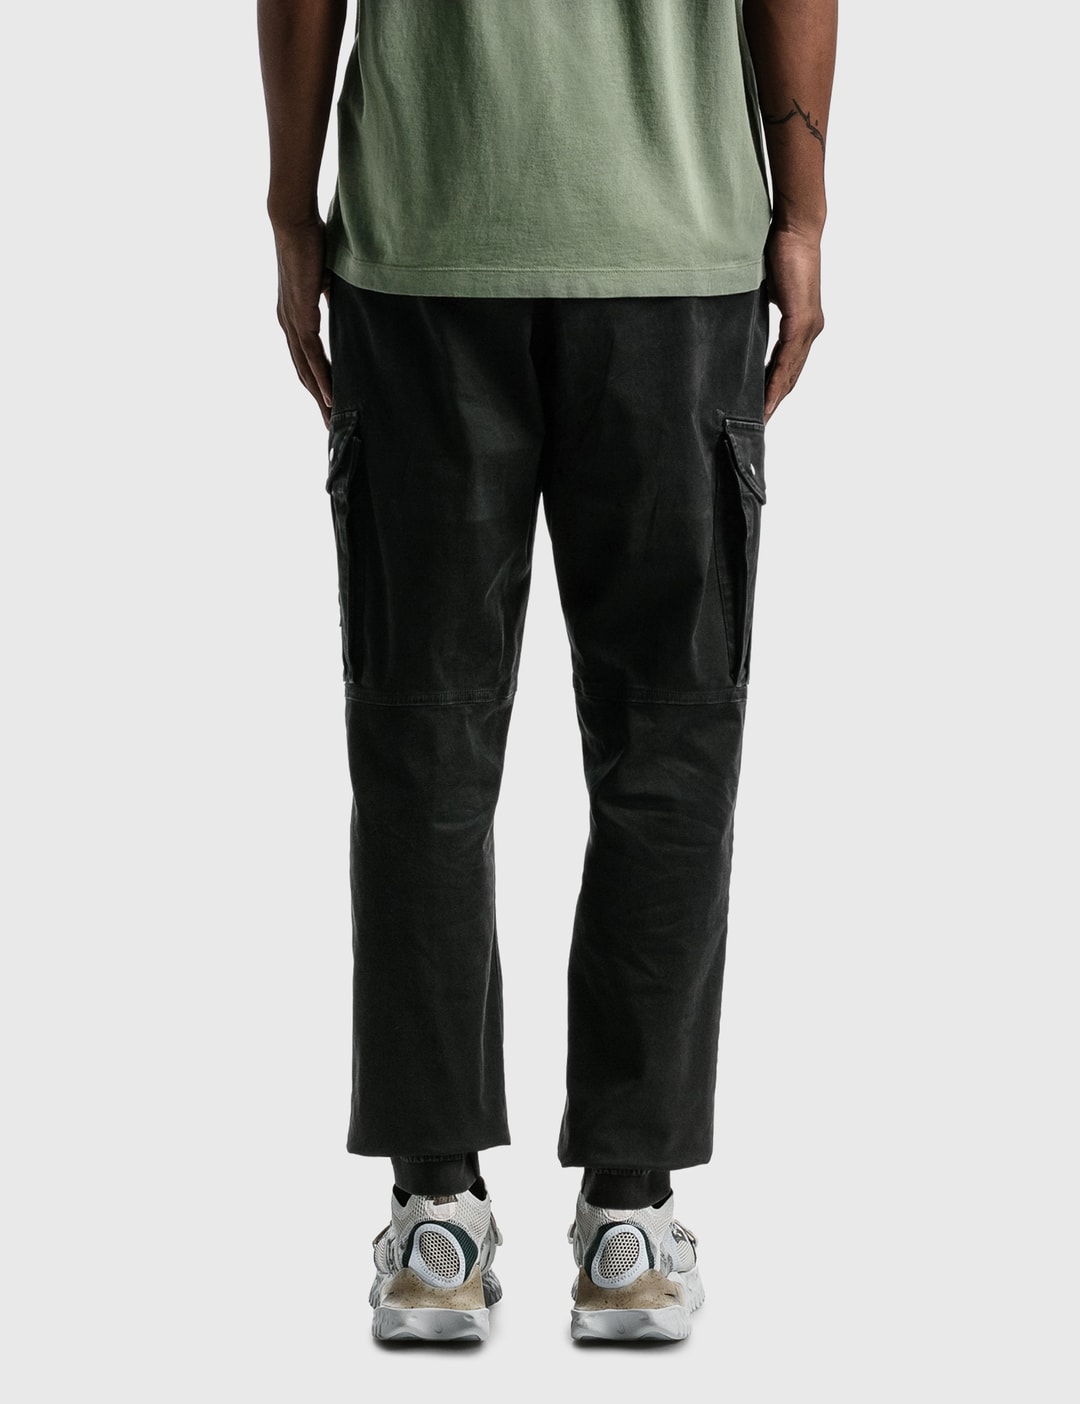 Stone Island - Regular Fit Cargo Pants | HBX - Globally Curated Fashion ...